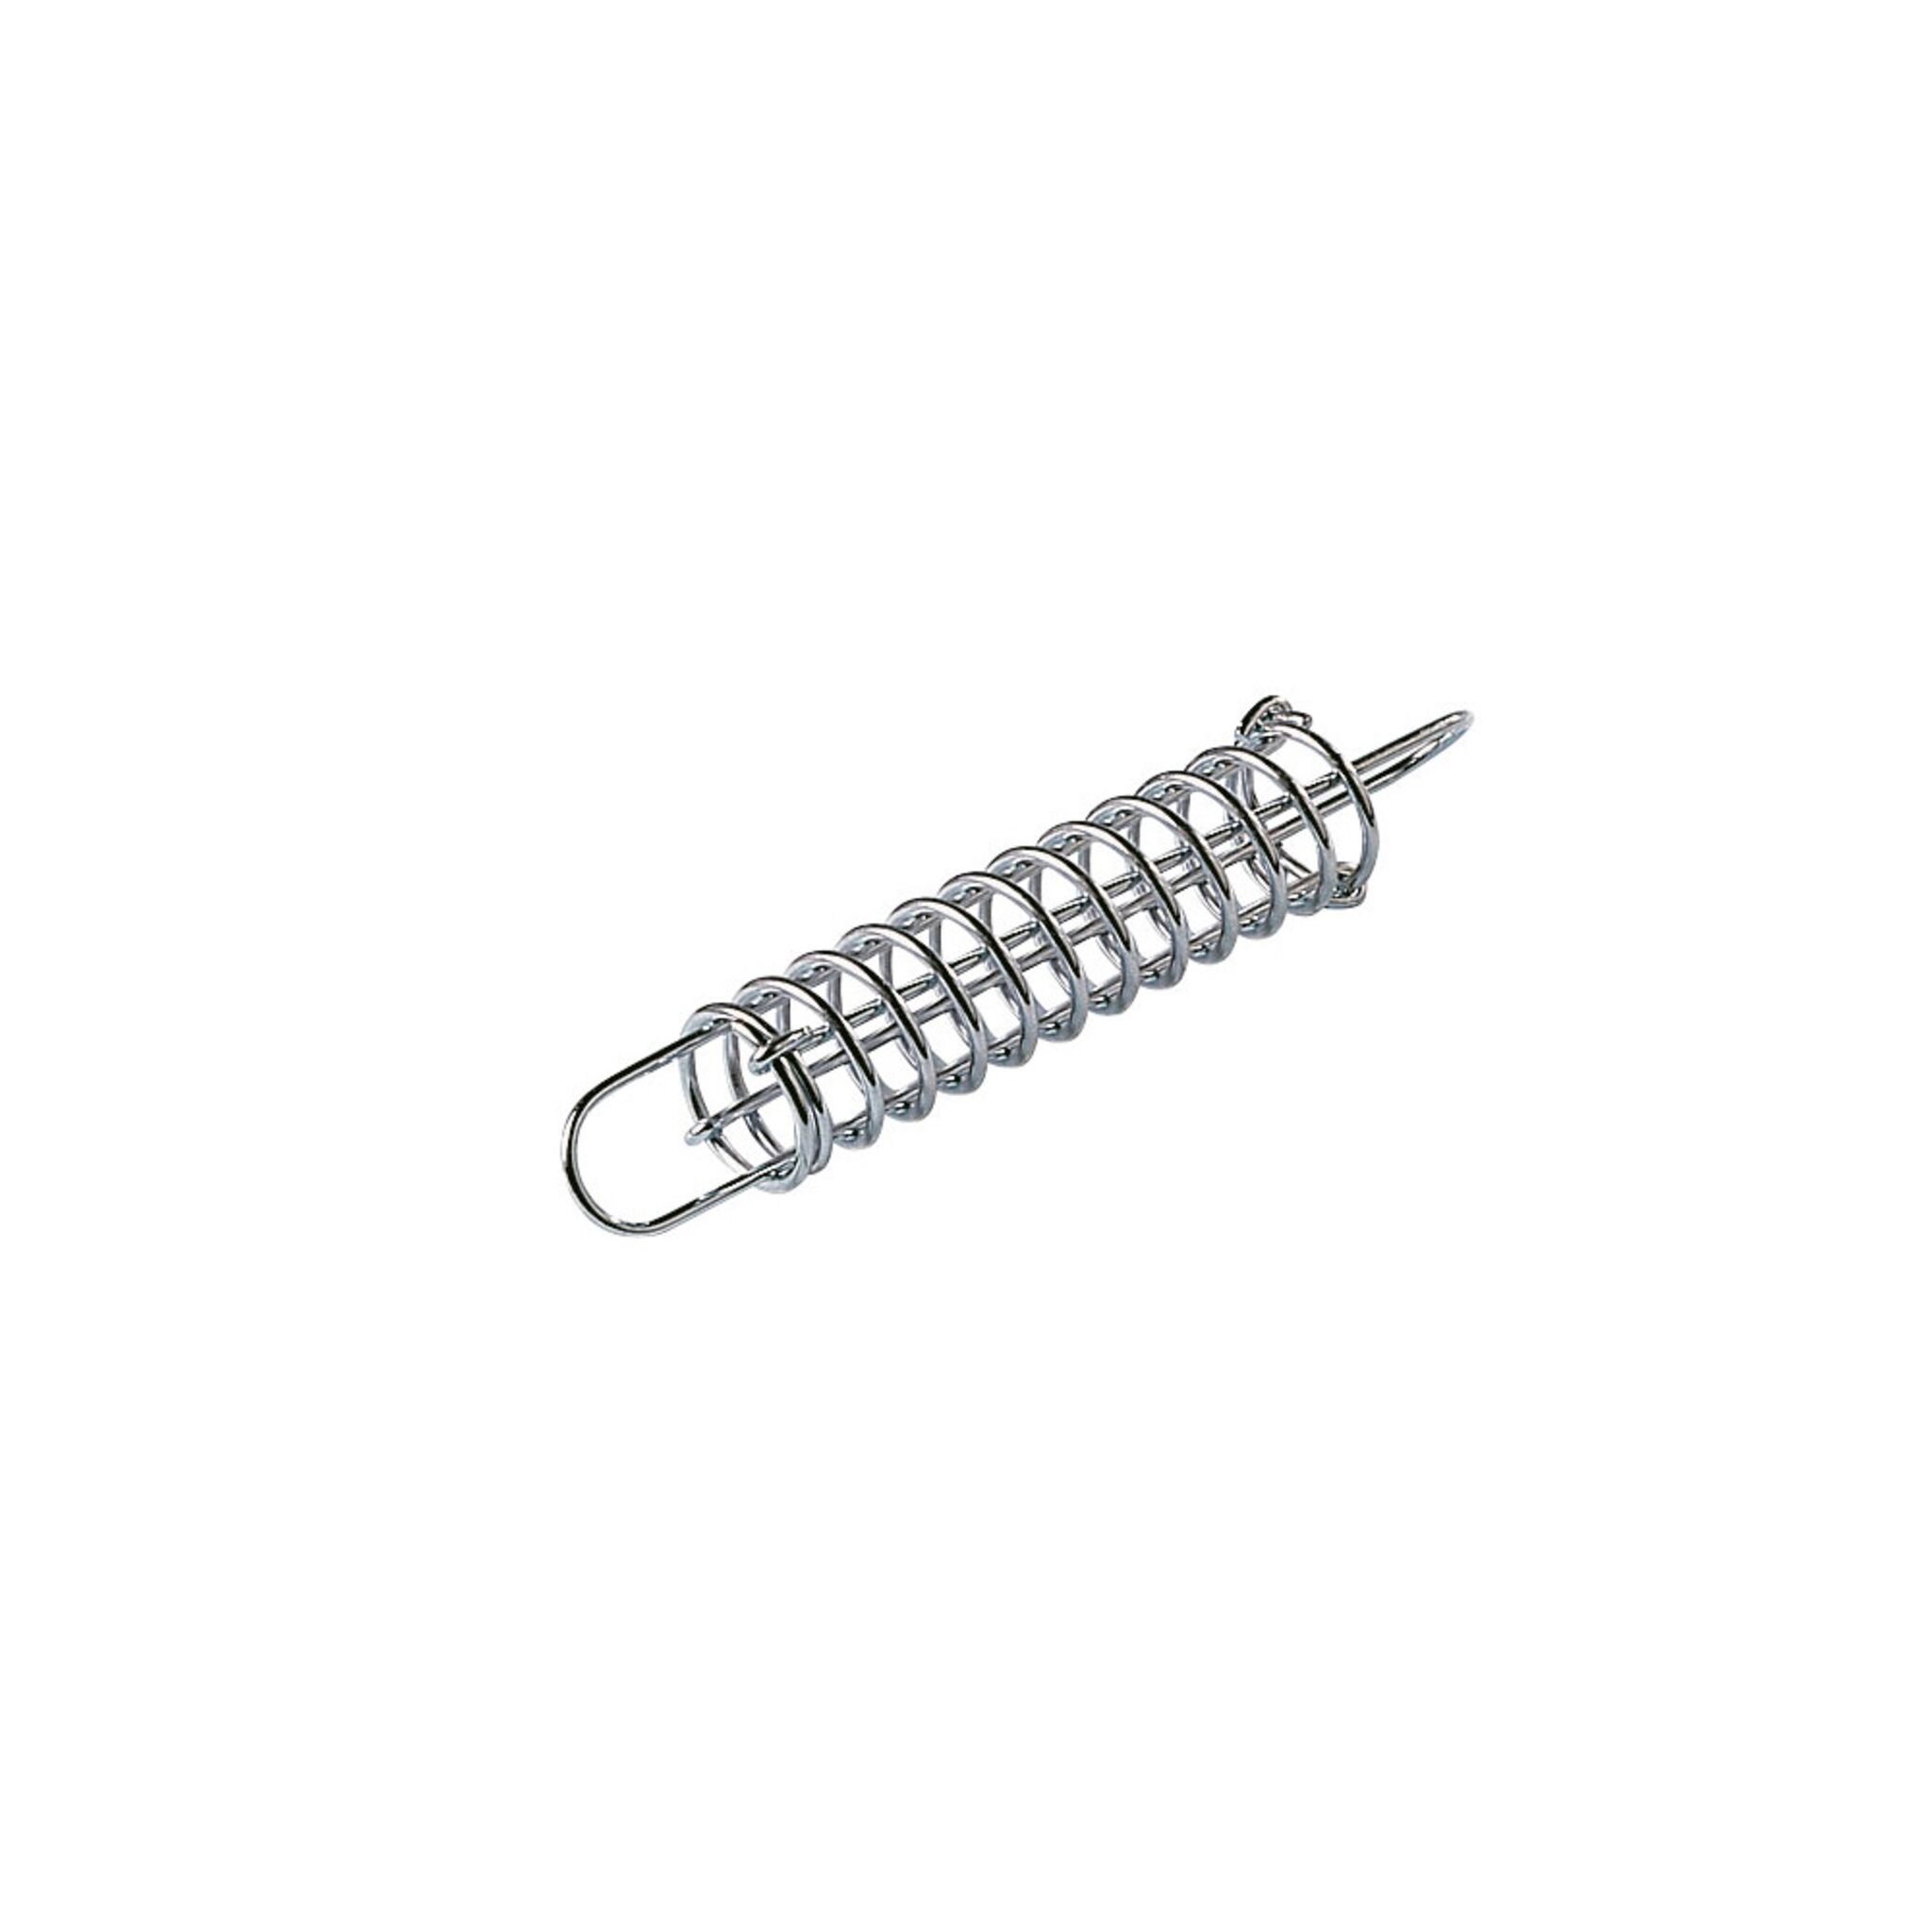 Stainless steel contact spring 5 mm